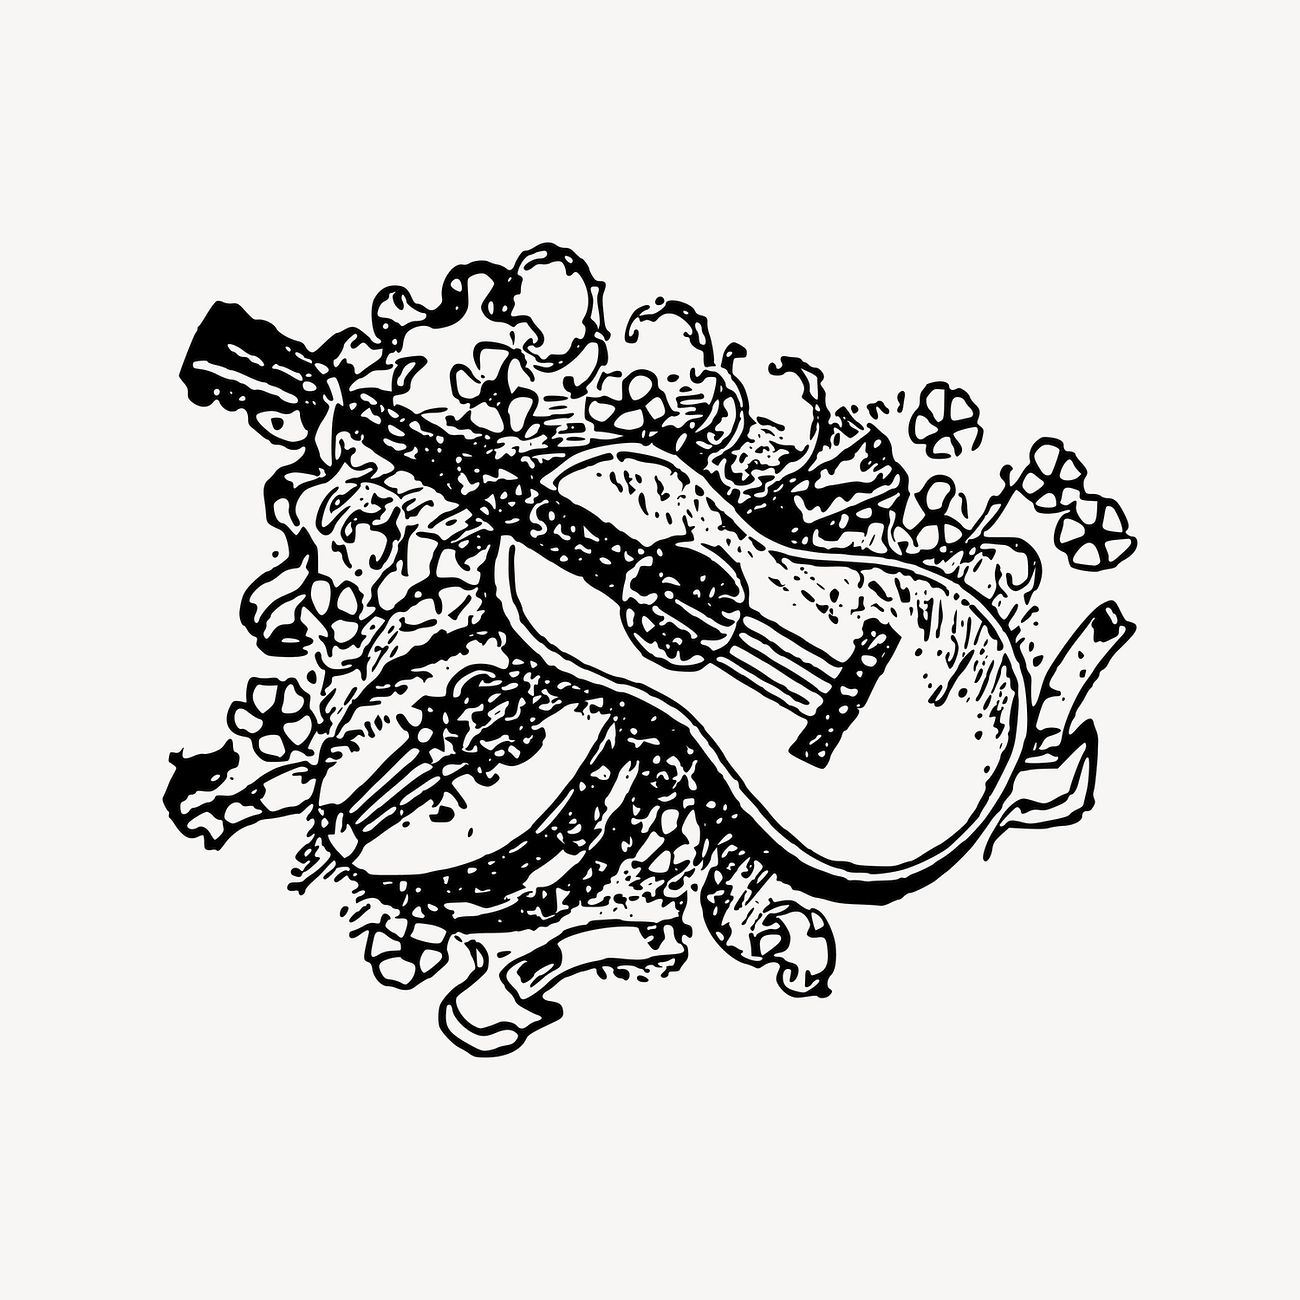 Acoustic guitars drawing, vintage music